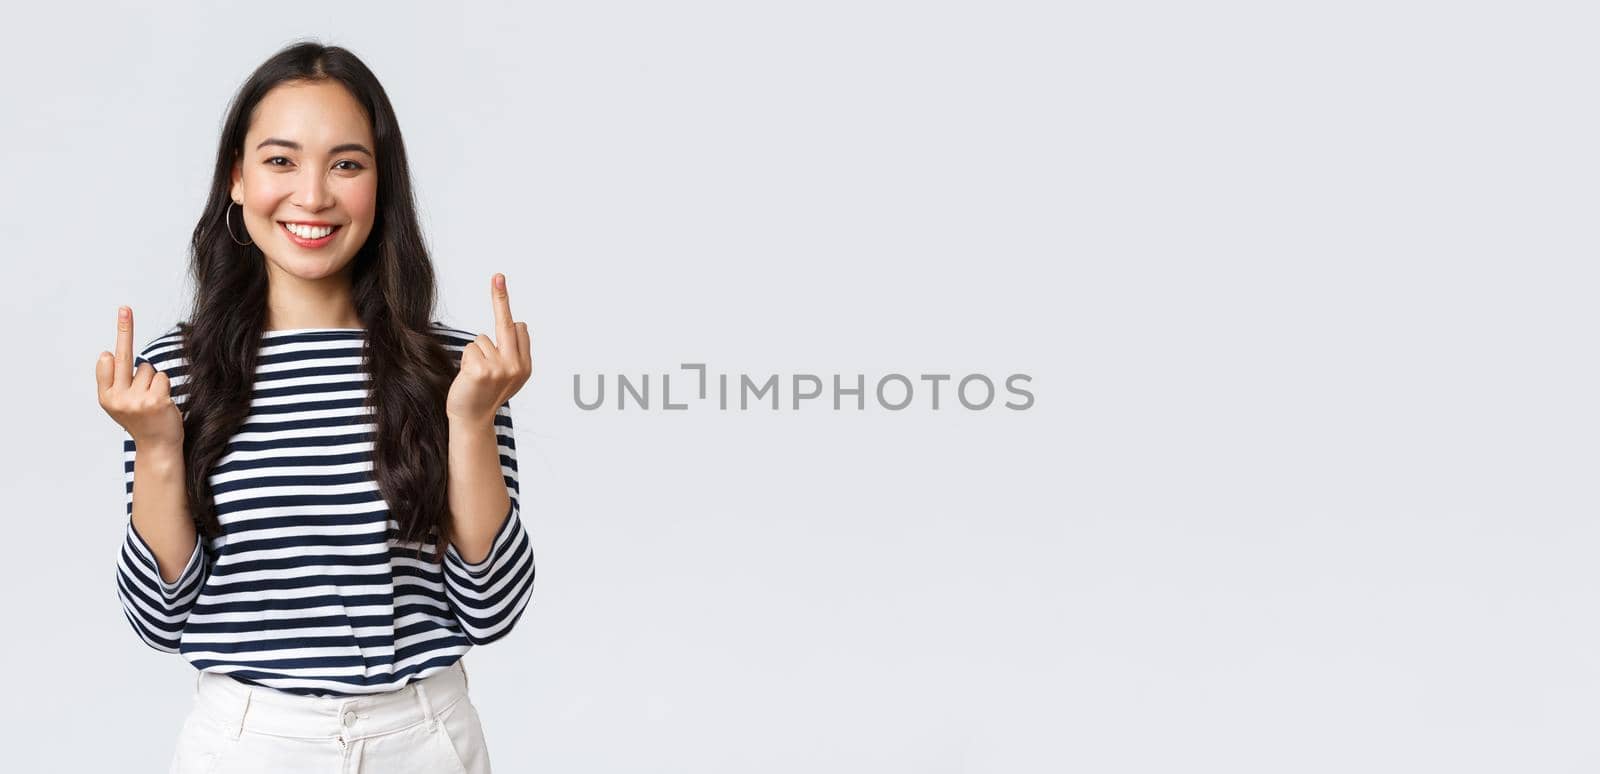 Lifestyle, beauty and fashion, people emotions concept. Unbothered and careless young happy smiling woman dont give a damn, showing middle fingers and feeling good, white background.